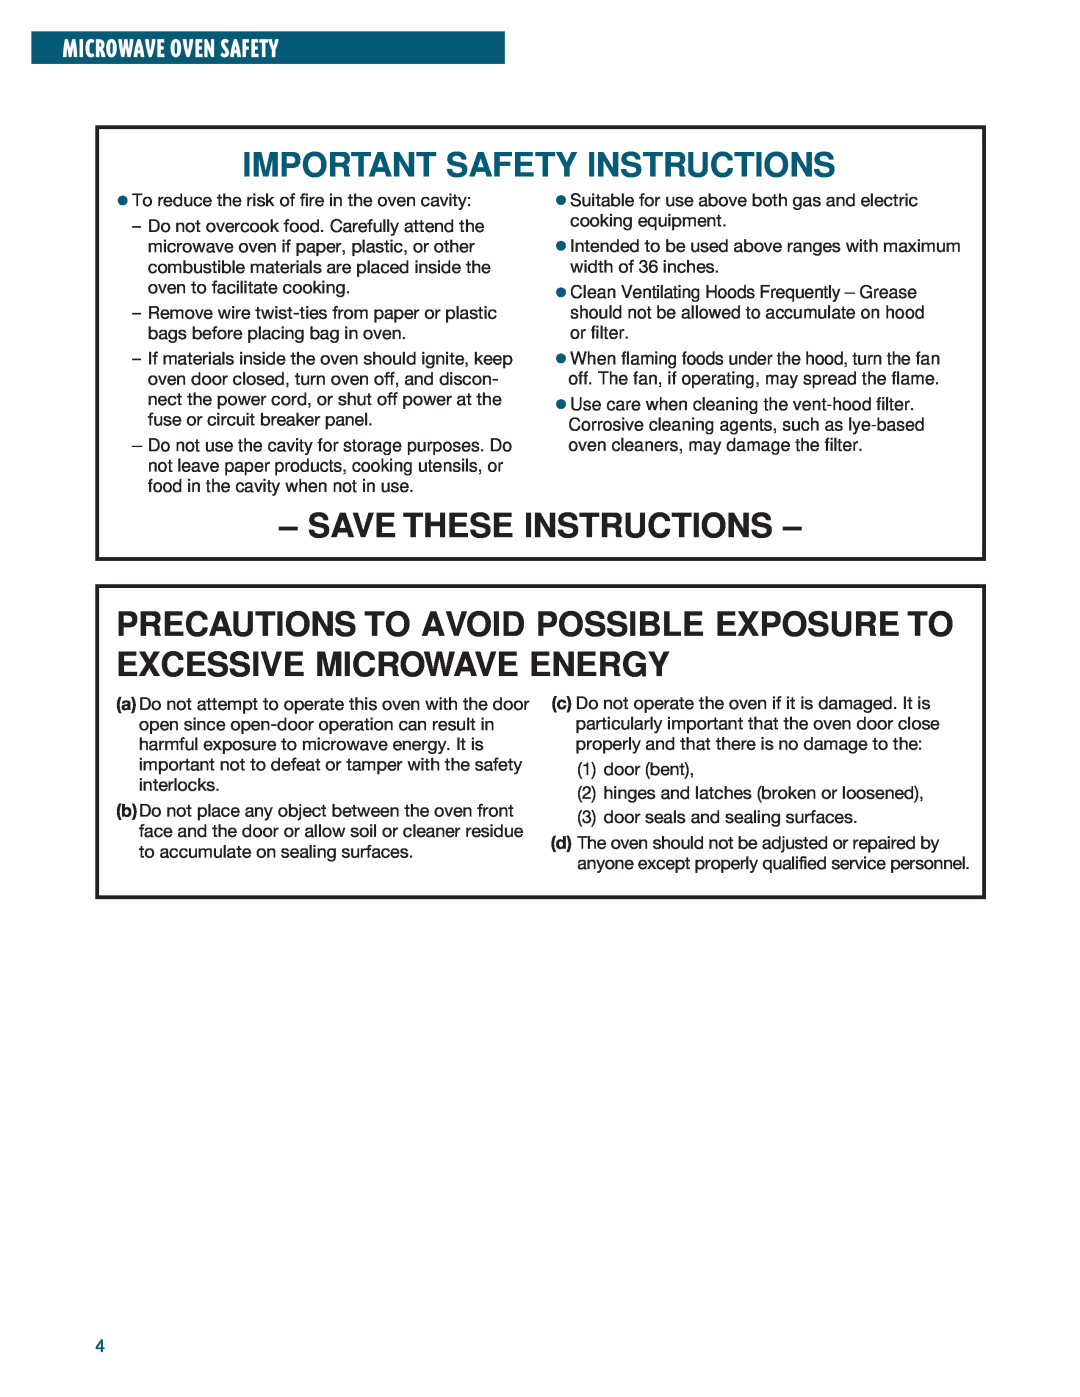 Whirlpool YMH6140XF Precautions To Avoid Possible Exposure To Excessive Microwave Energy, Microwave Oven Safety 